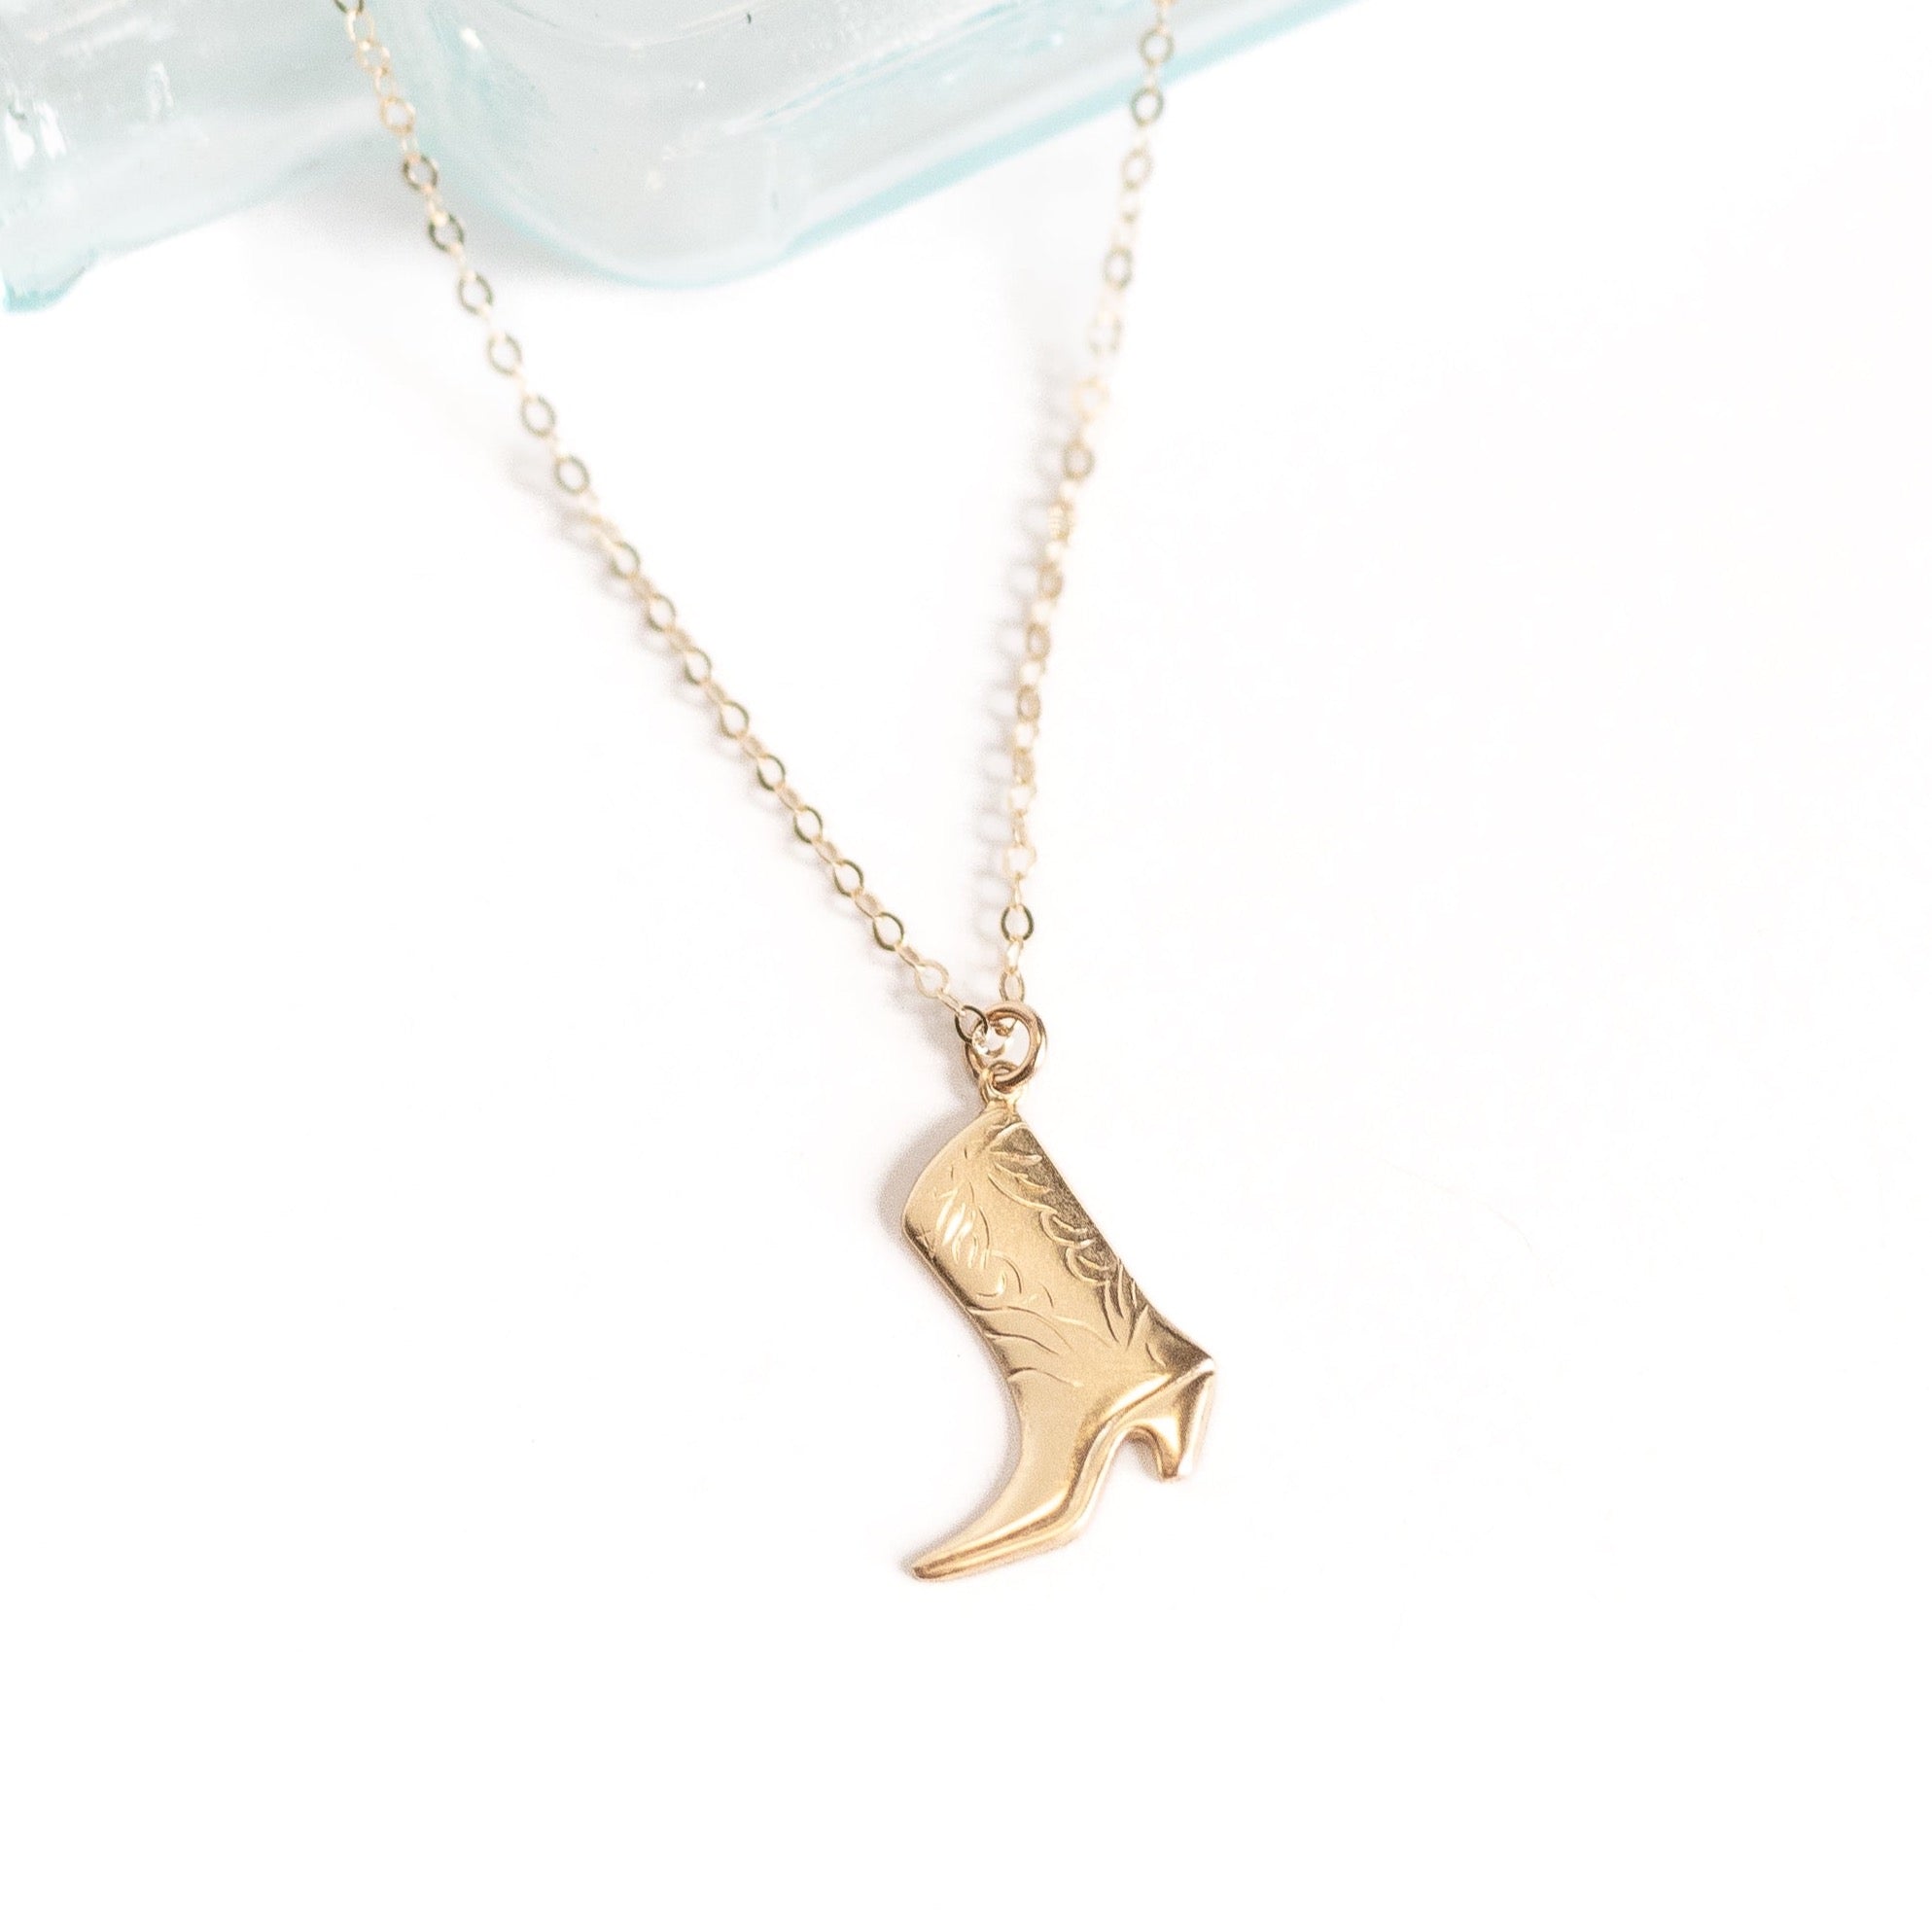 A little less than one inch long gold cowgirl boot charm attached to a gold chain.